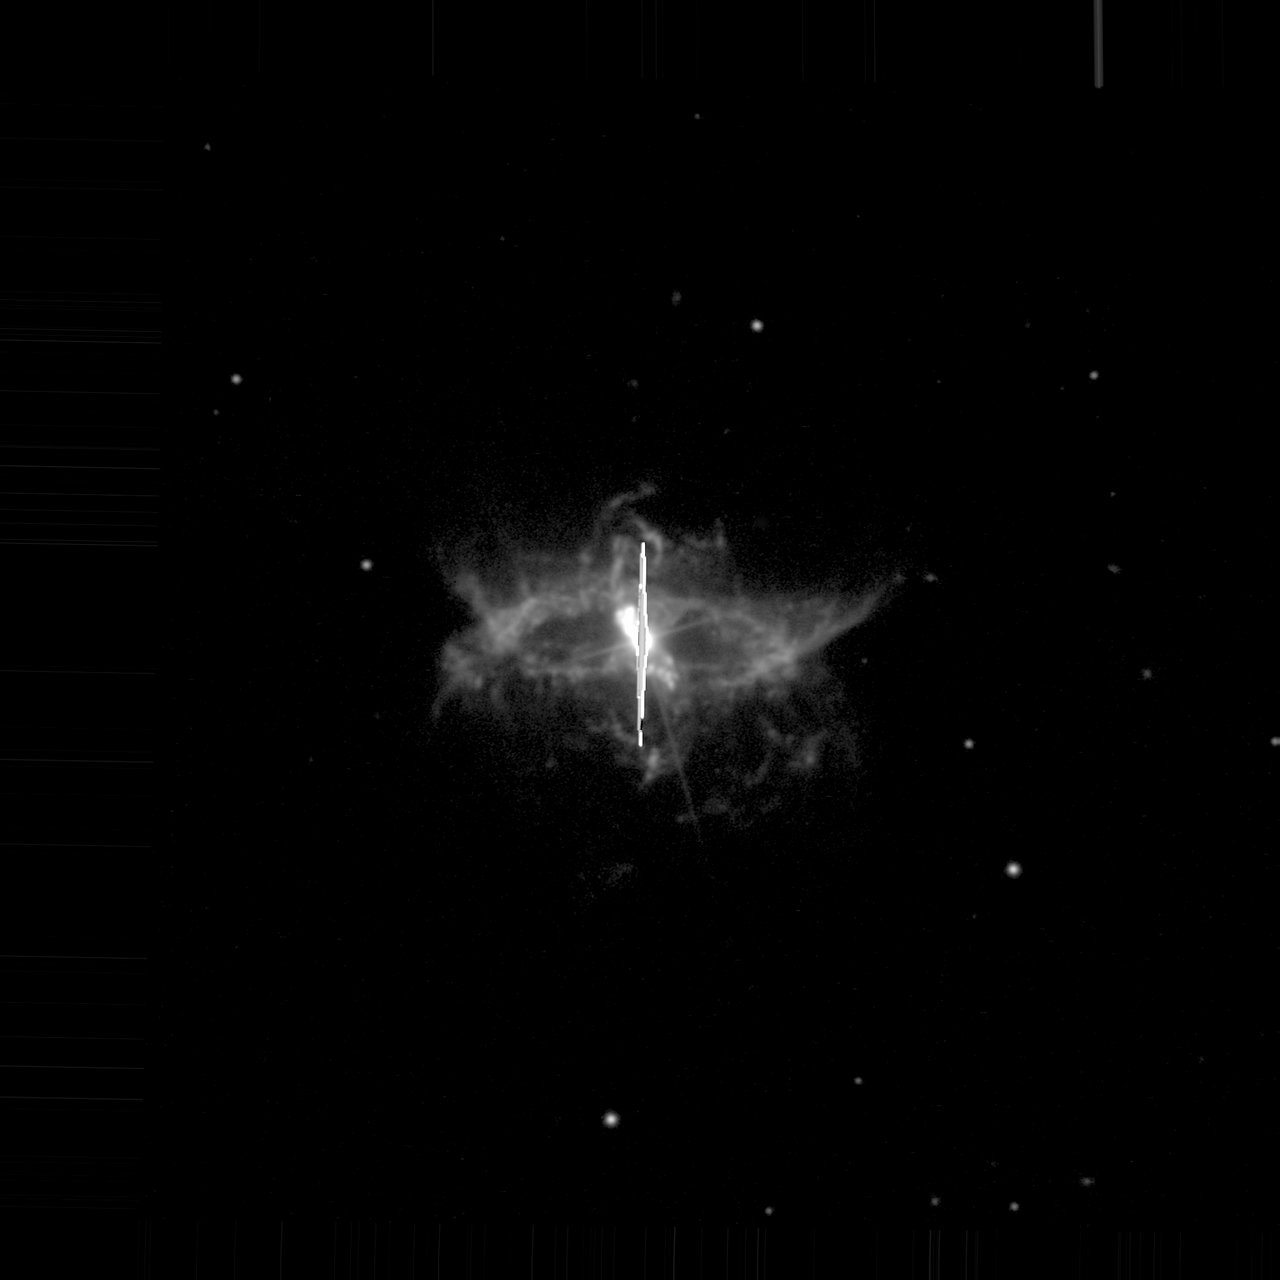 R Aquarii observed using the New Technology Telescope